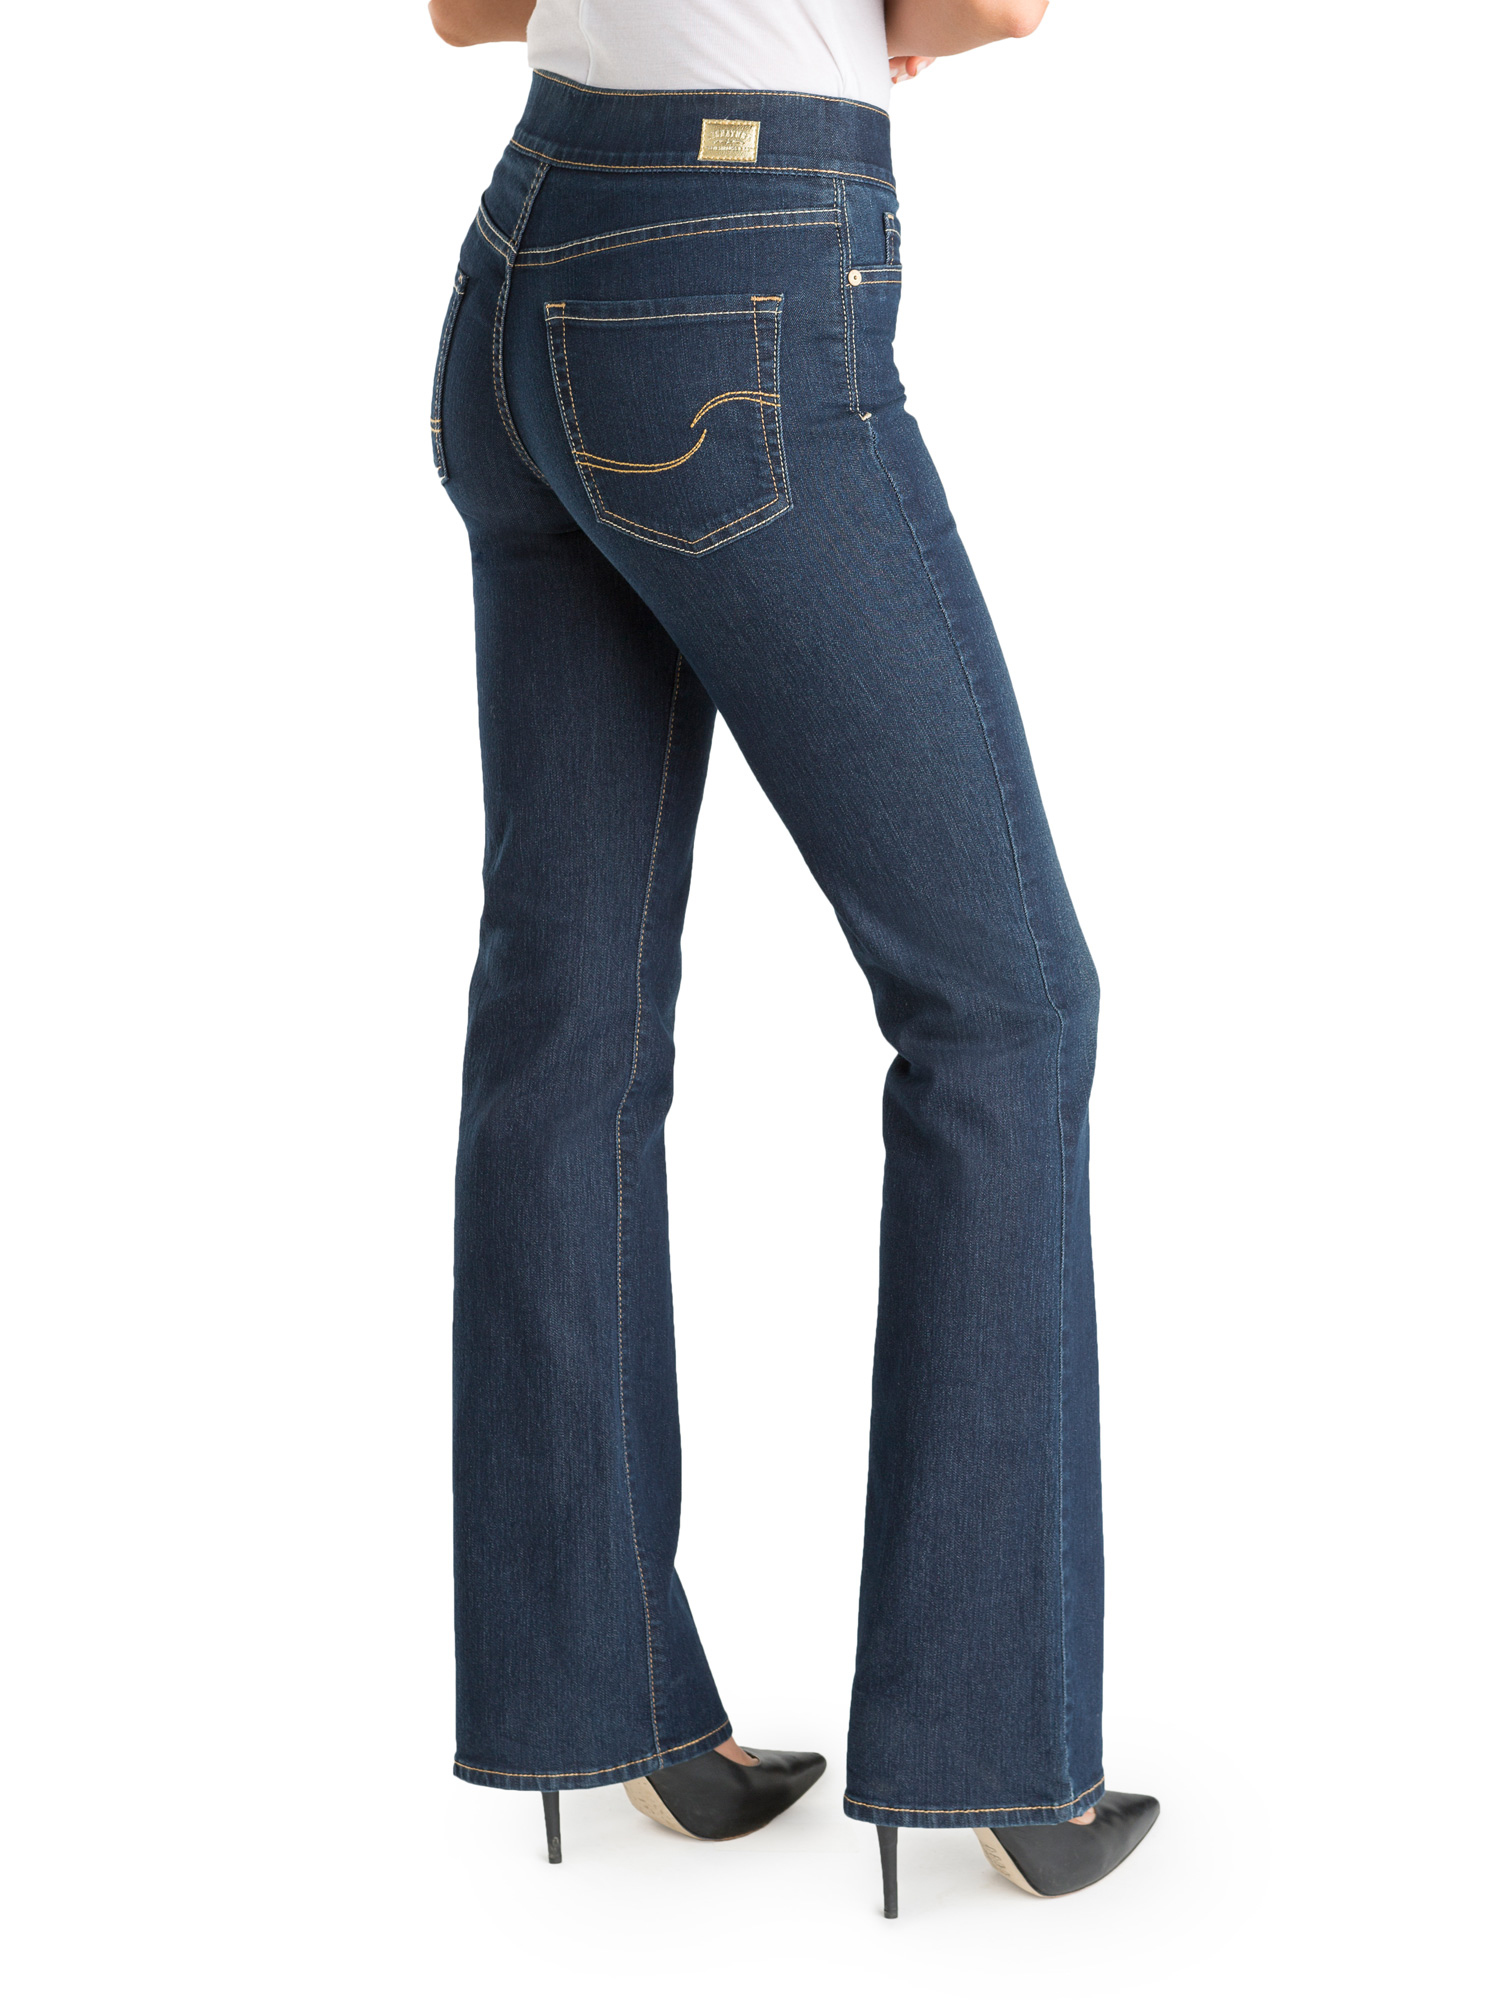 Signature by Levi Strauss & Co. Women's Totally Shaping Pull On Bootcut Jeans - image 2 of 2